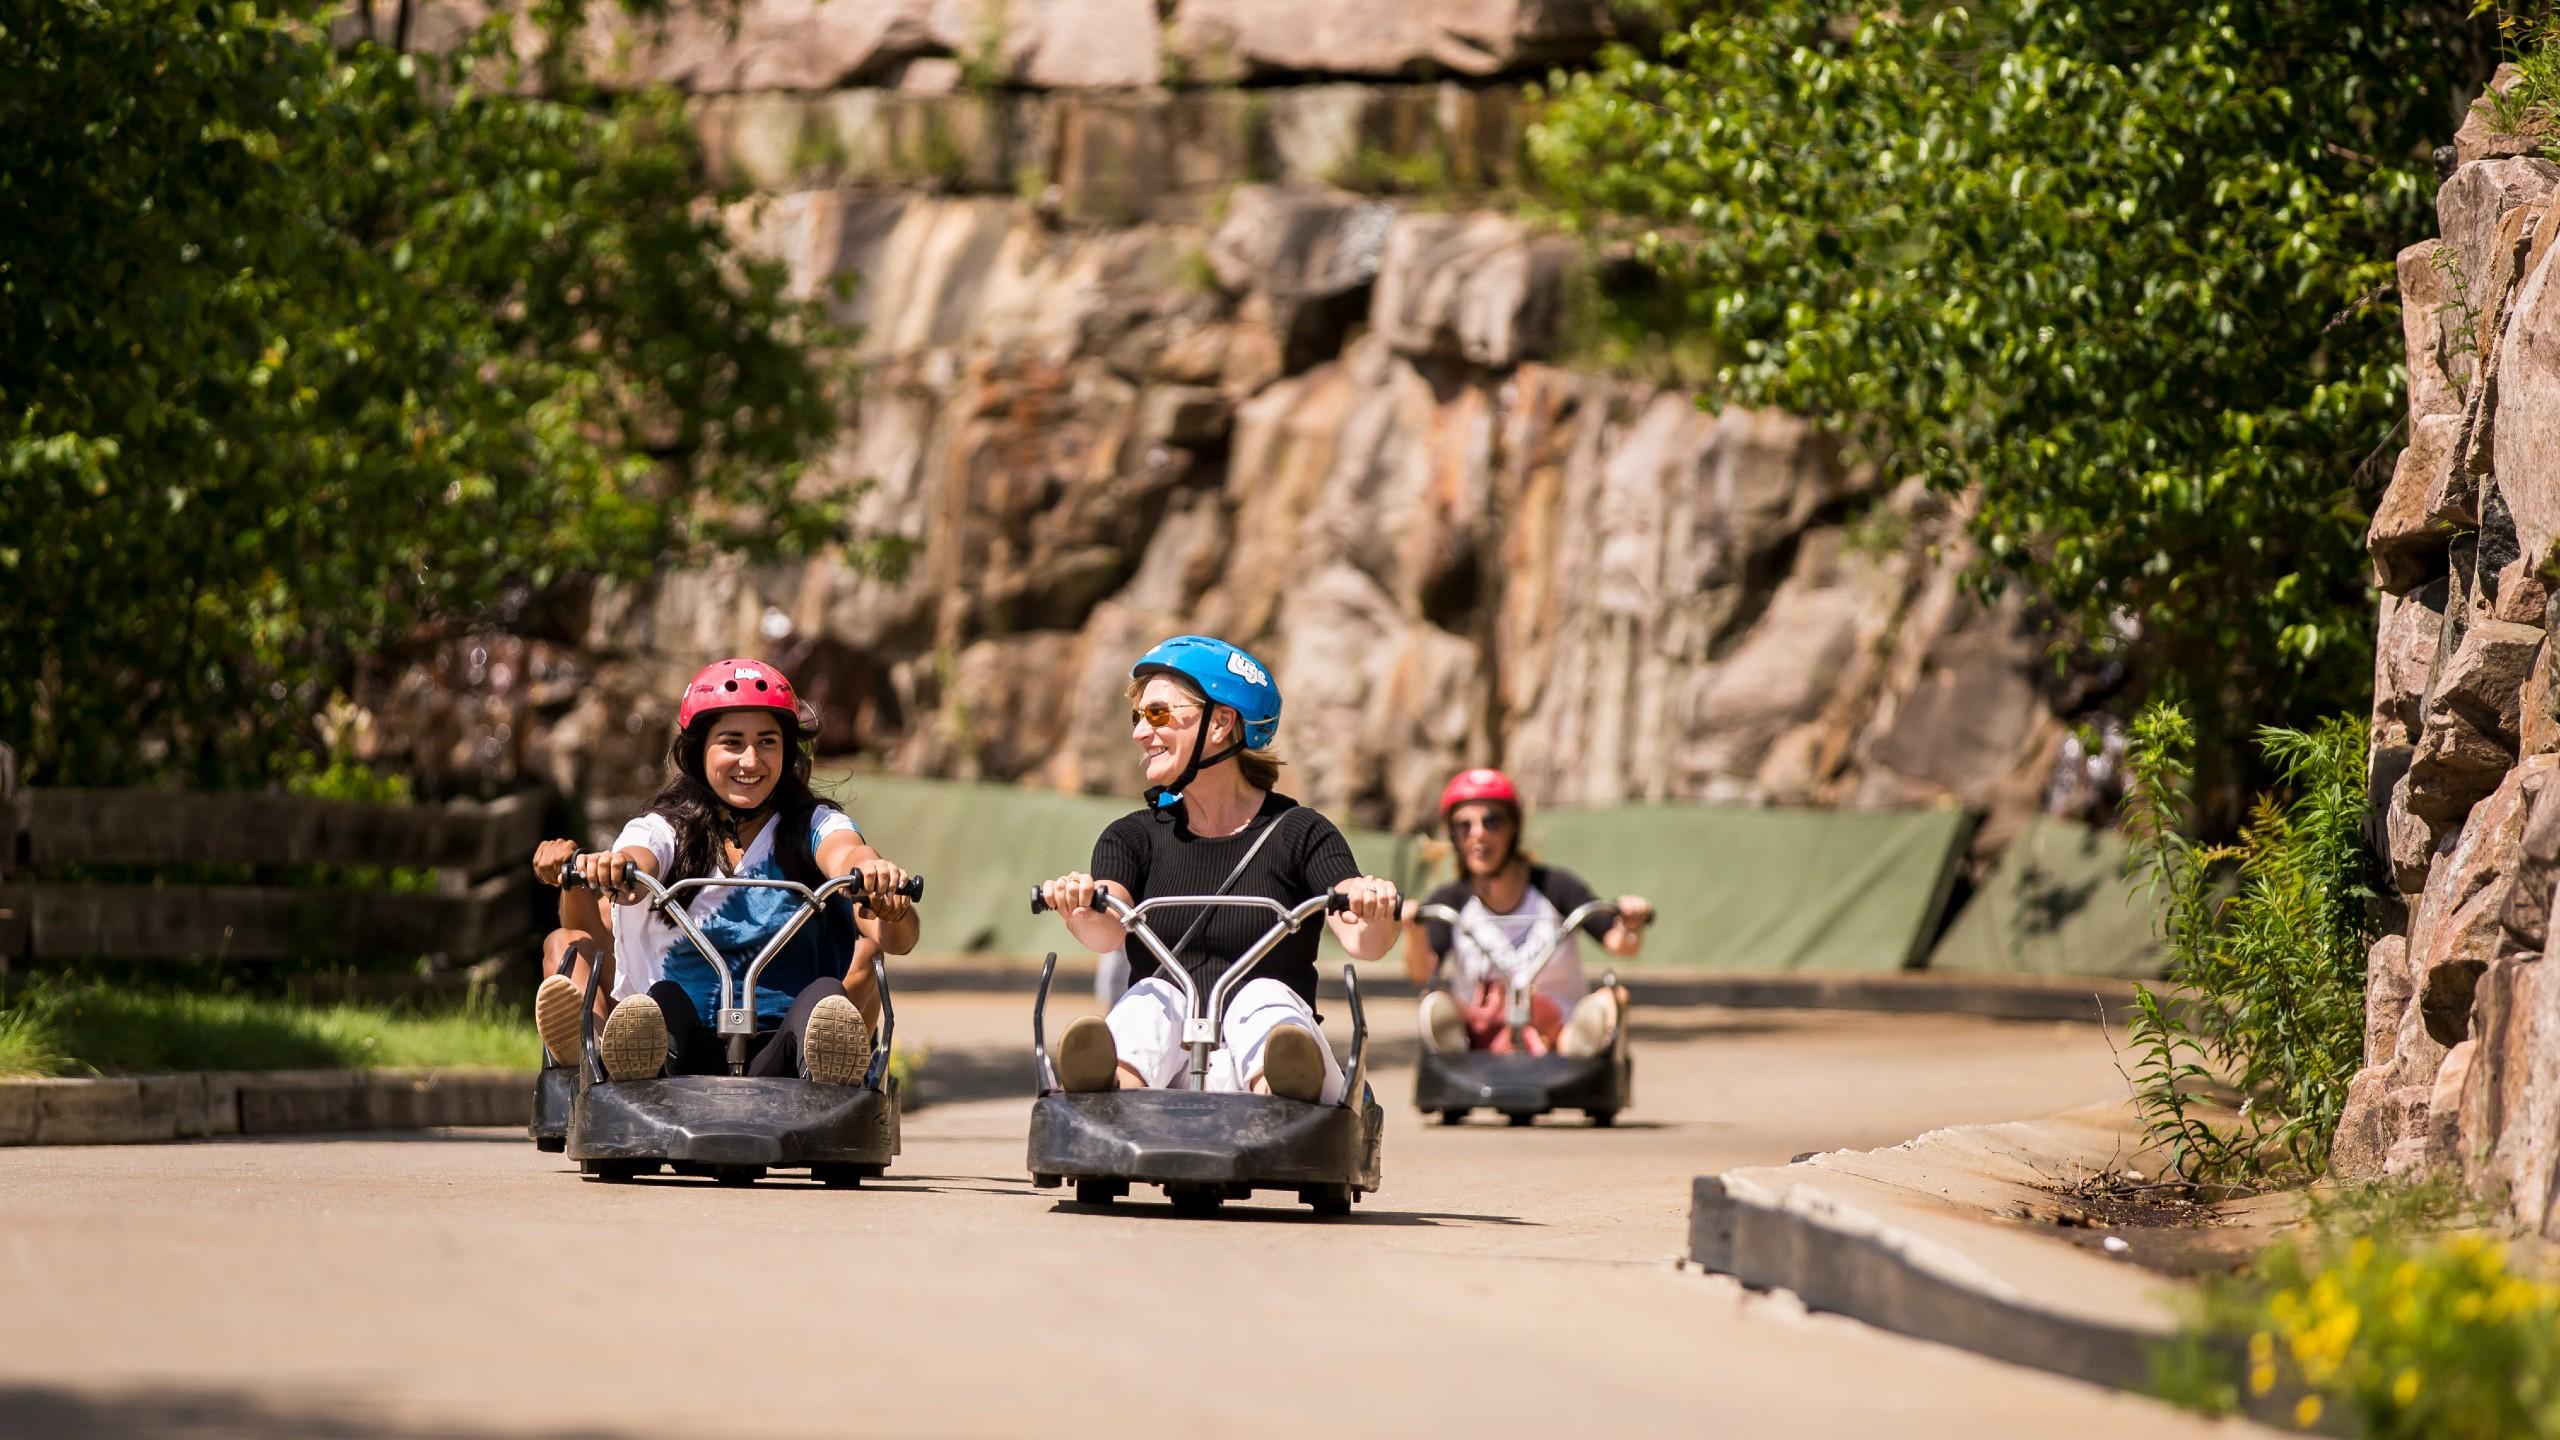 A lady glances over at her friend as they ride down the Luge tracks together.